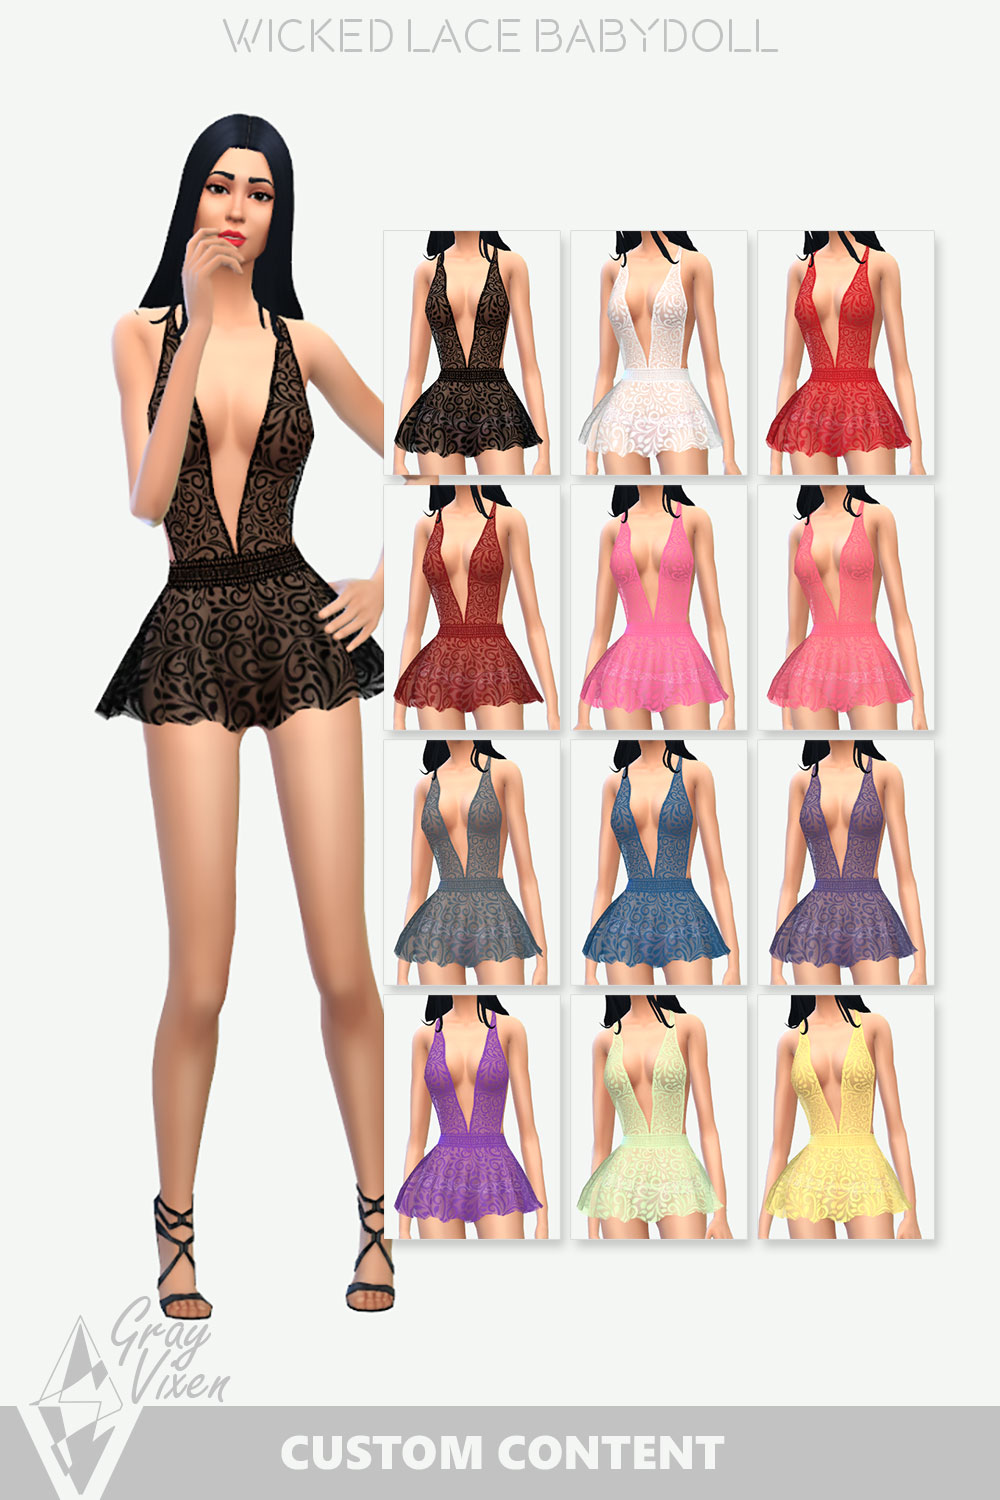 The Sims 4 Wicked Lace Babydoll